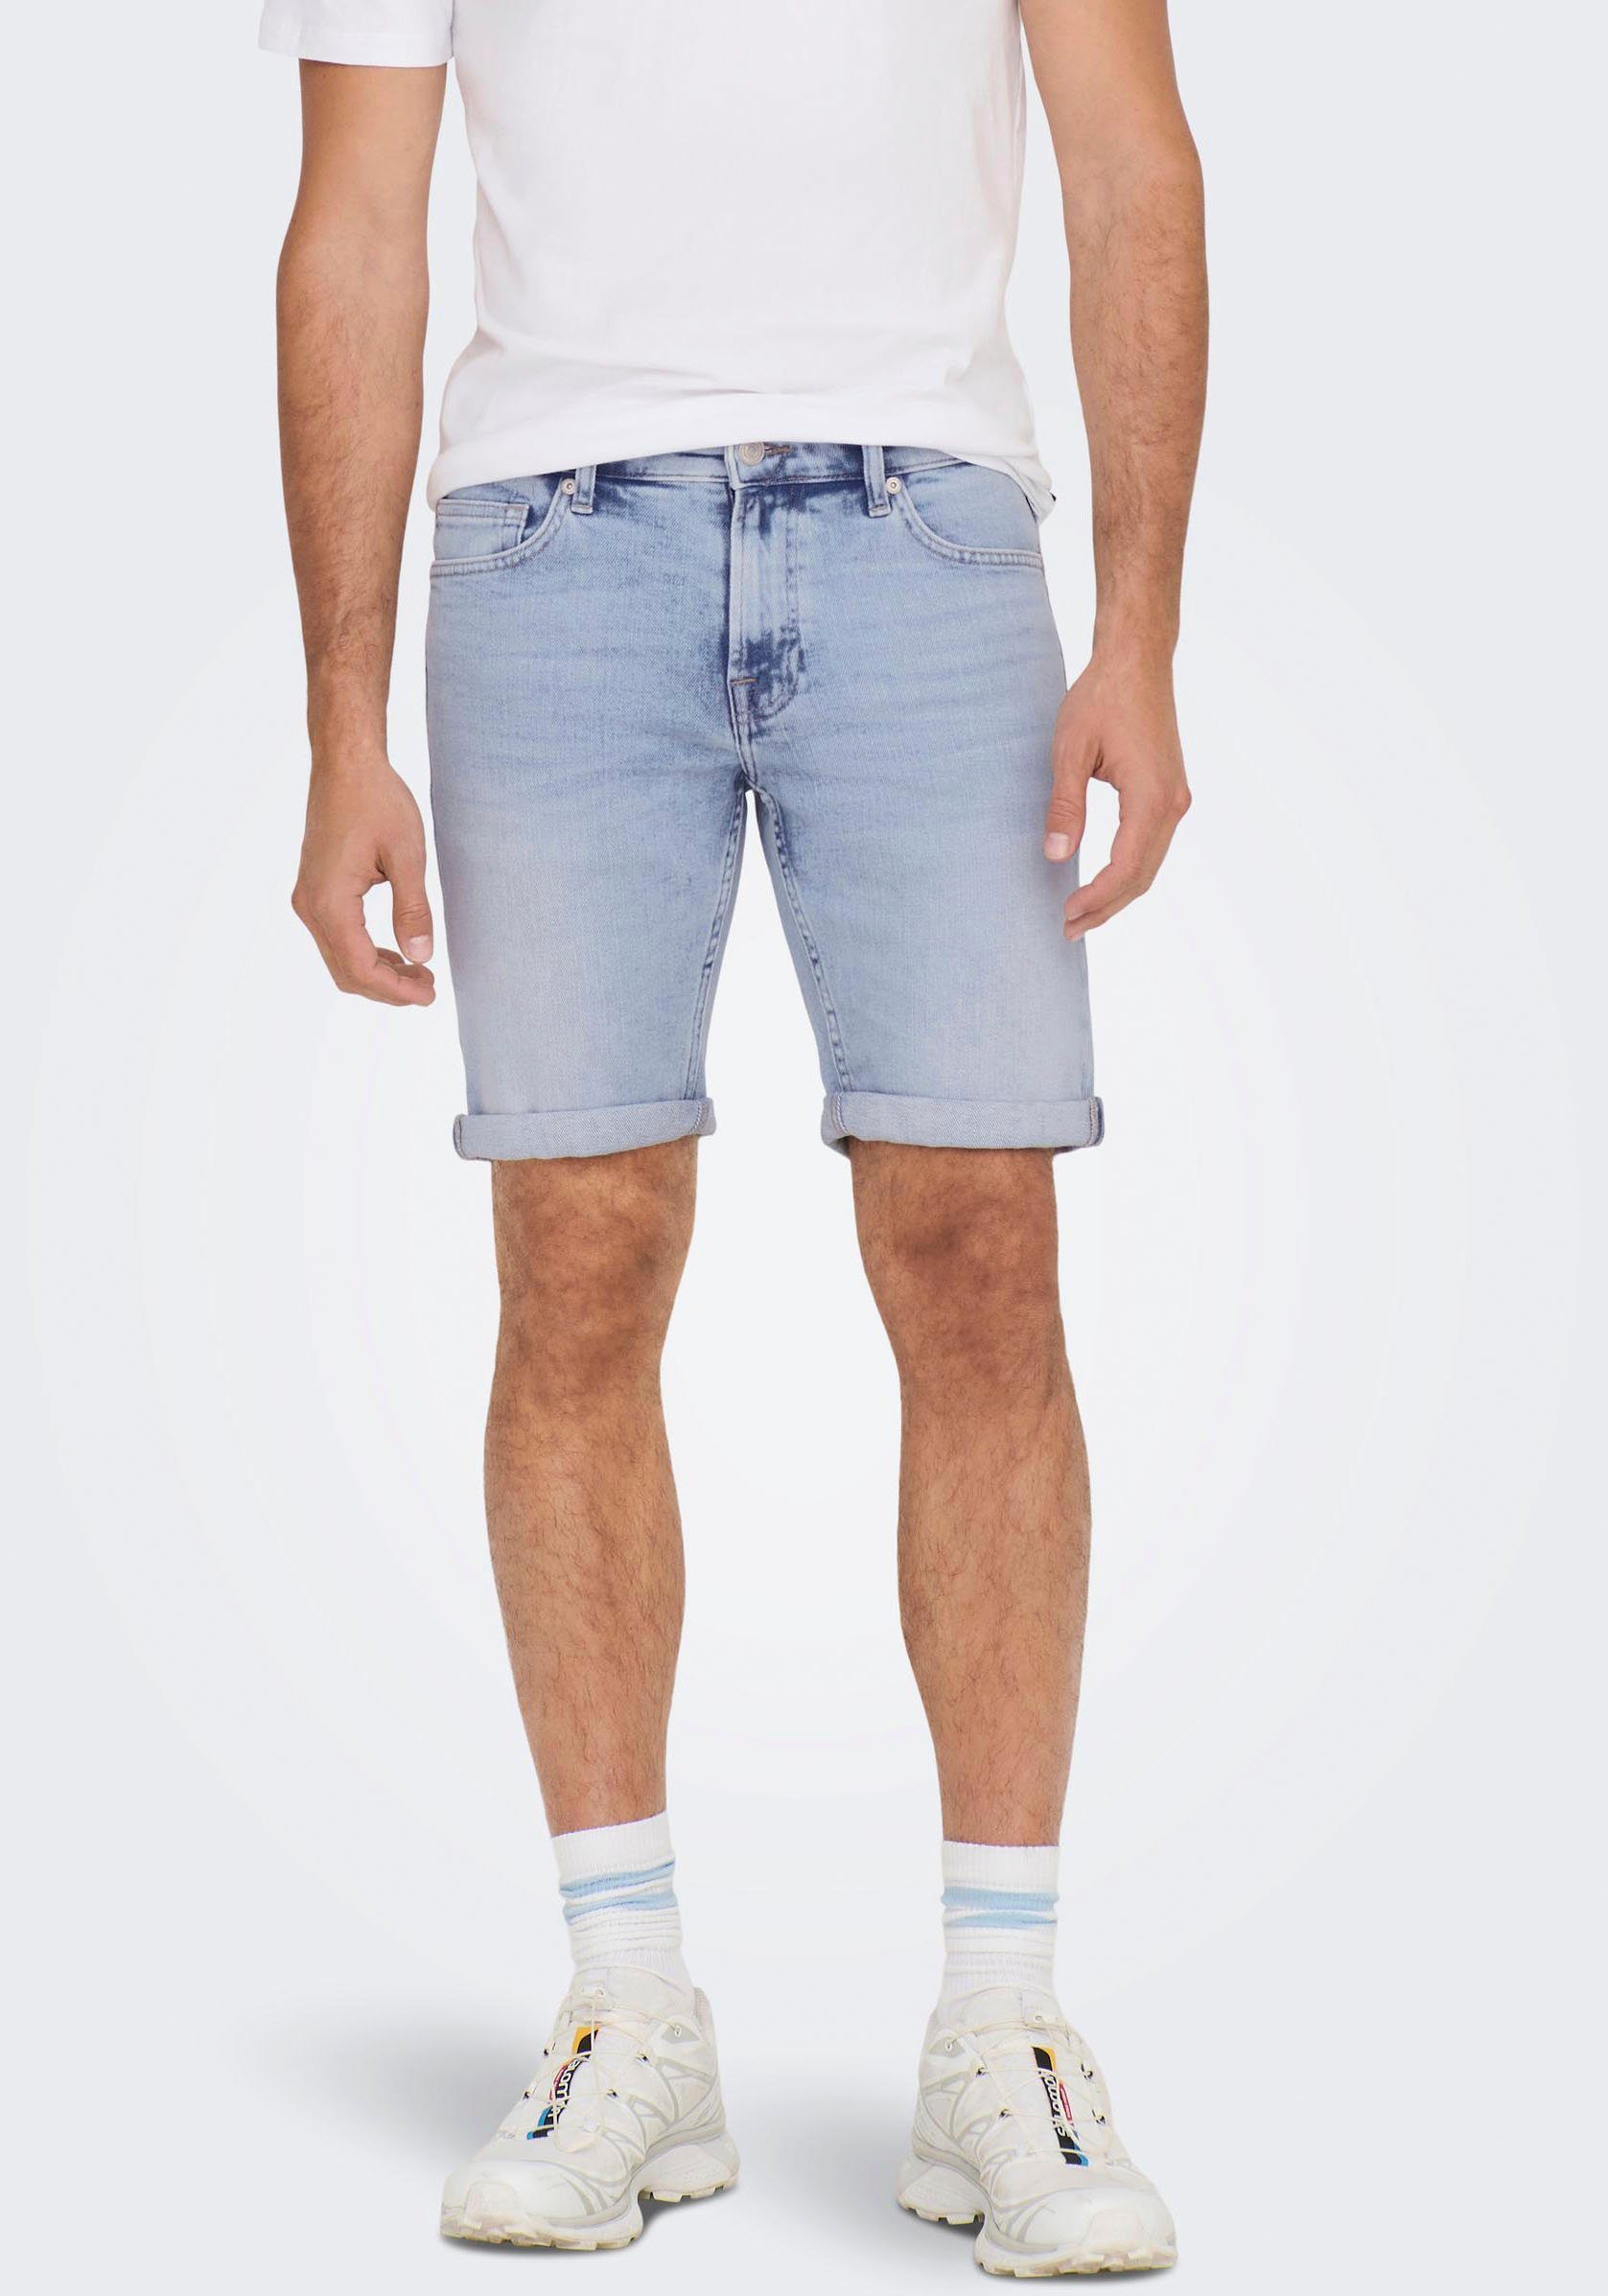 Blue BLUE LIGHT SHORTS SONS ONLY 5189 NOOS ONSPLY Denim DNM & Light Jeansshorts